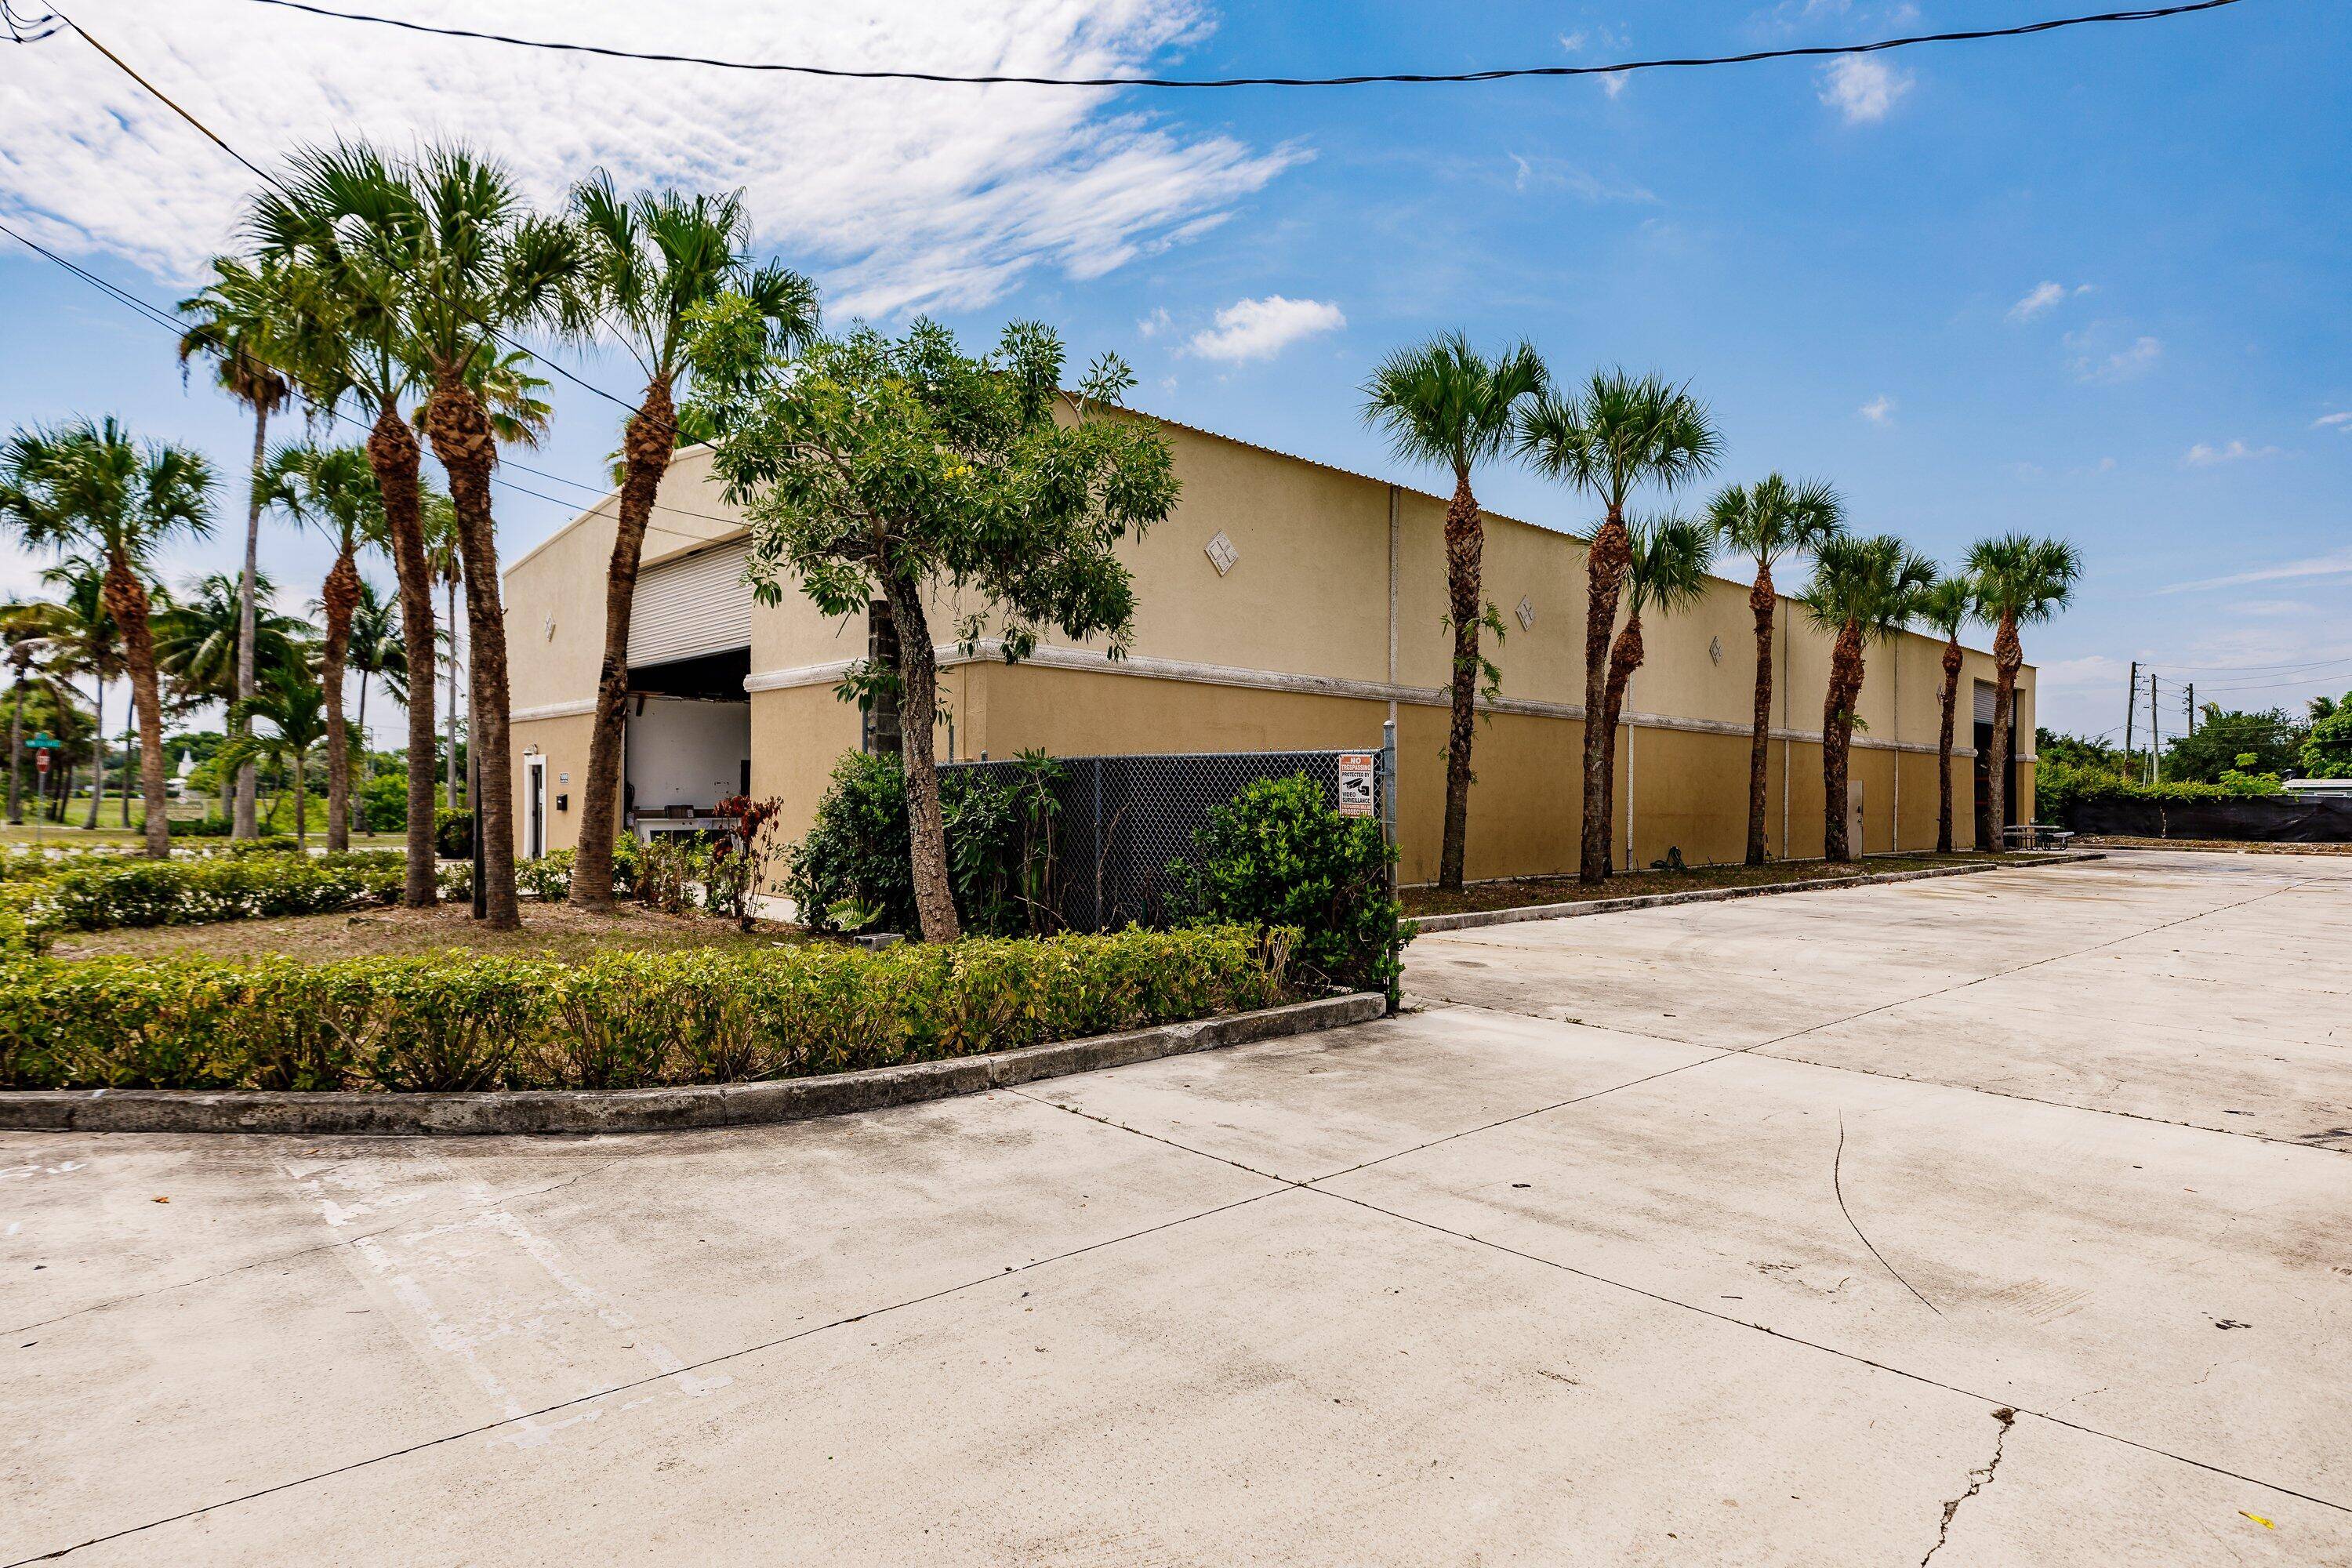 Unique opportunity to purchase the only free standing warehouse on a major rd in the Delray Boynton area.